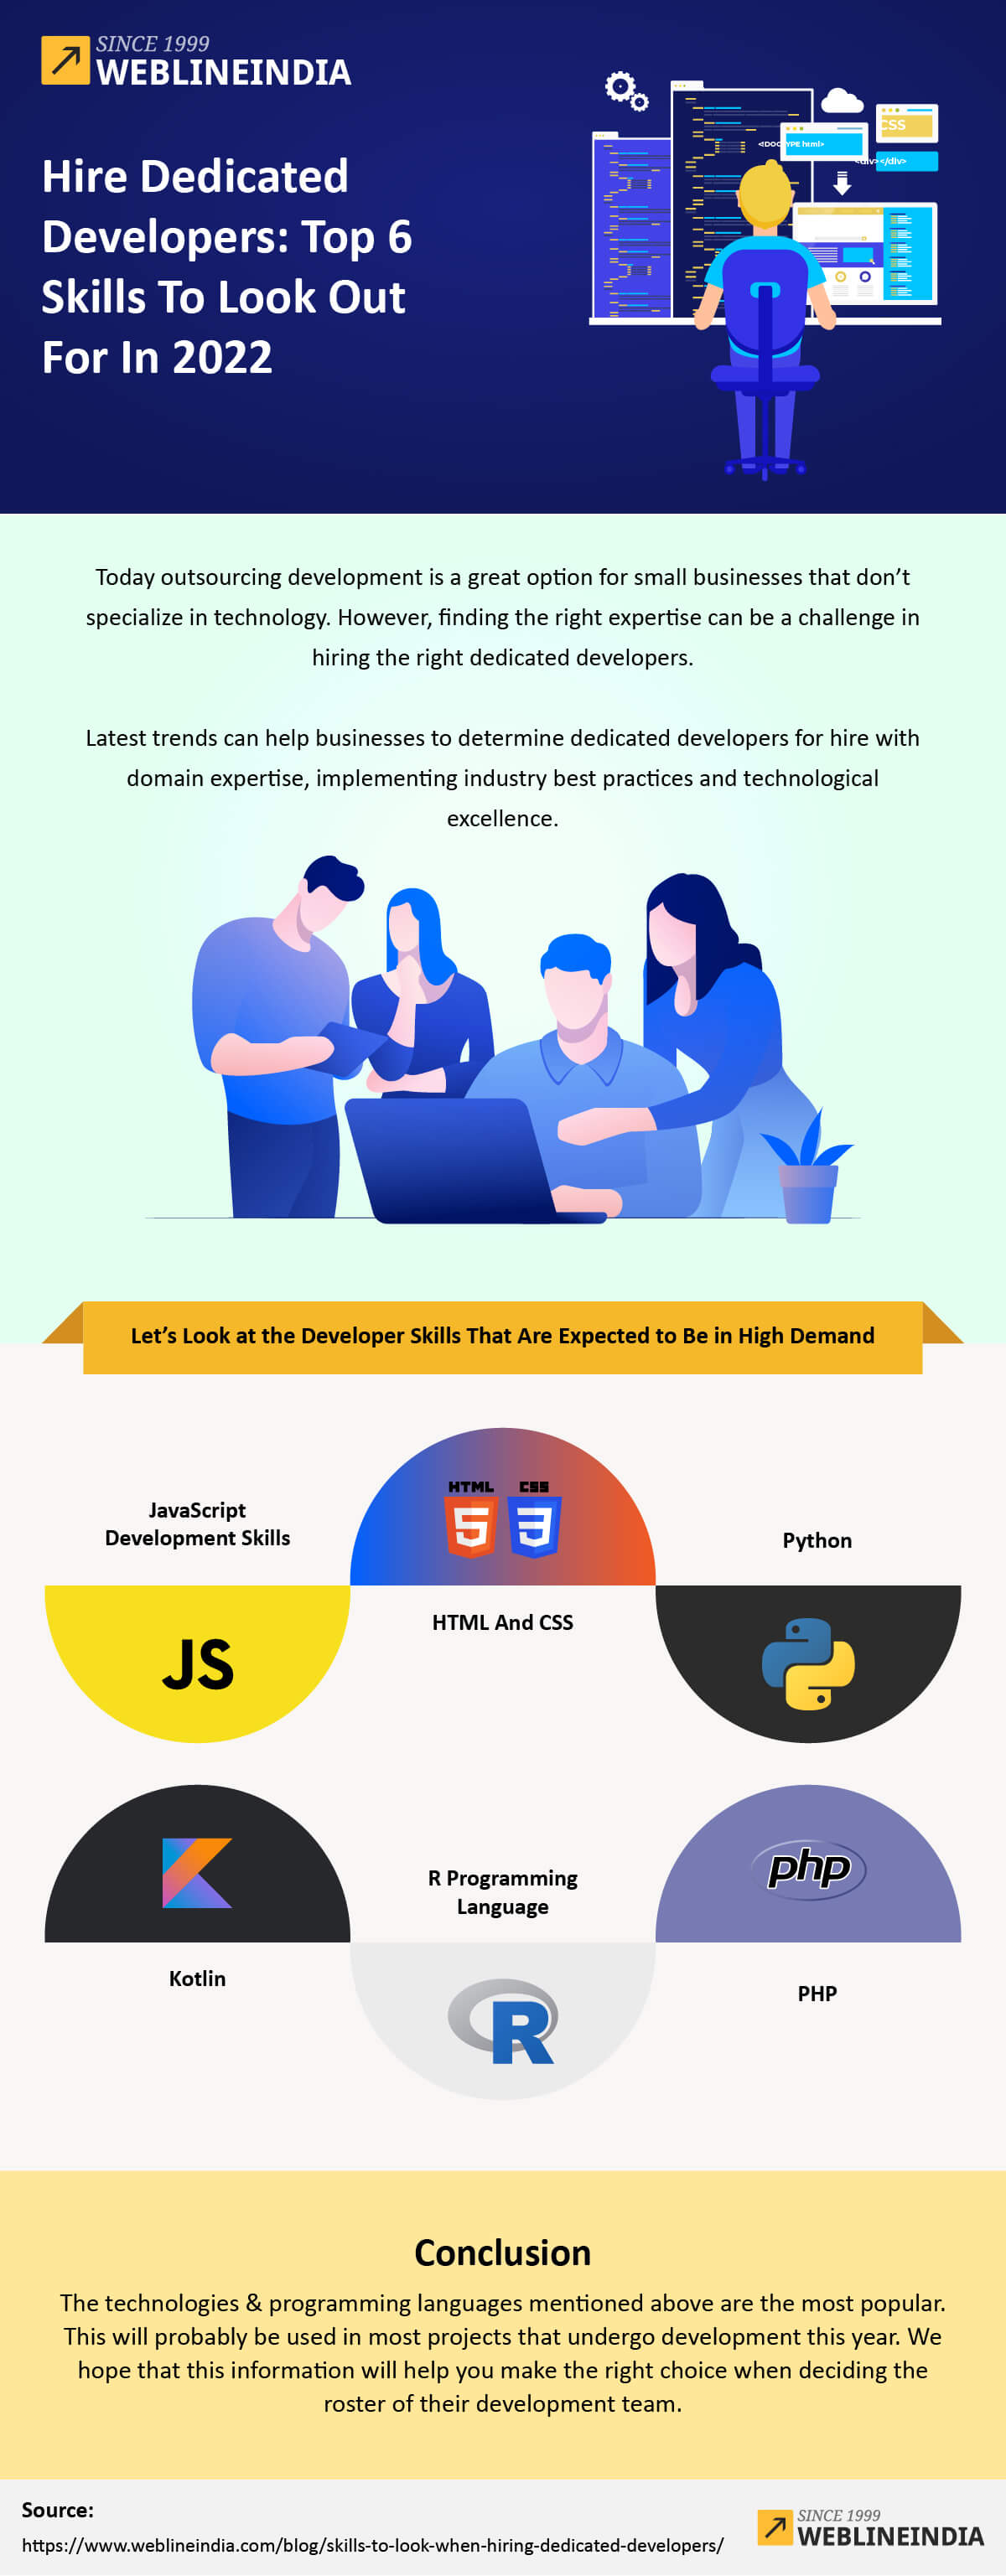 Hire Dedicated Developers Top 6 Skills To Look Out For In 2022 Infographic